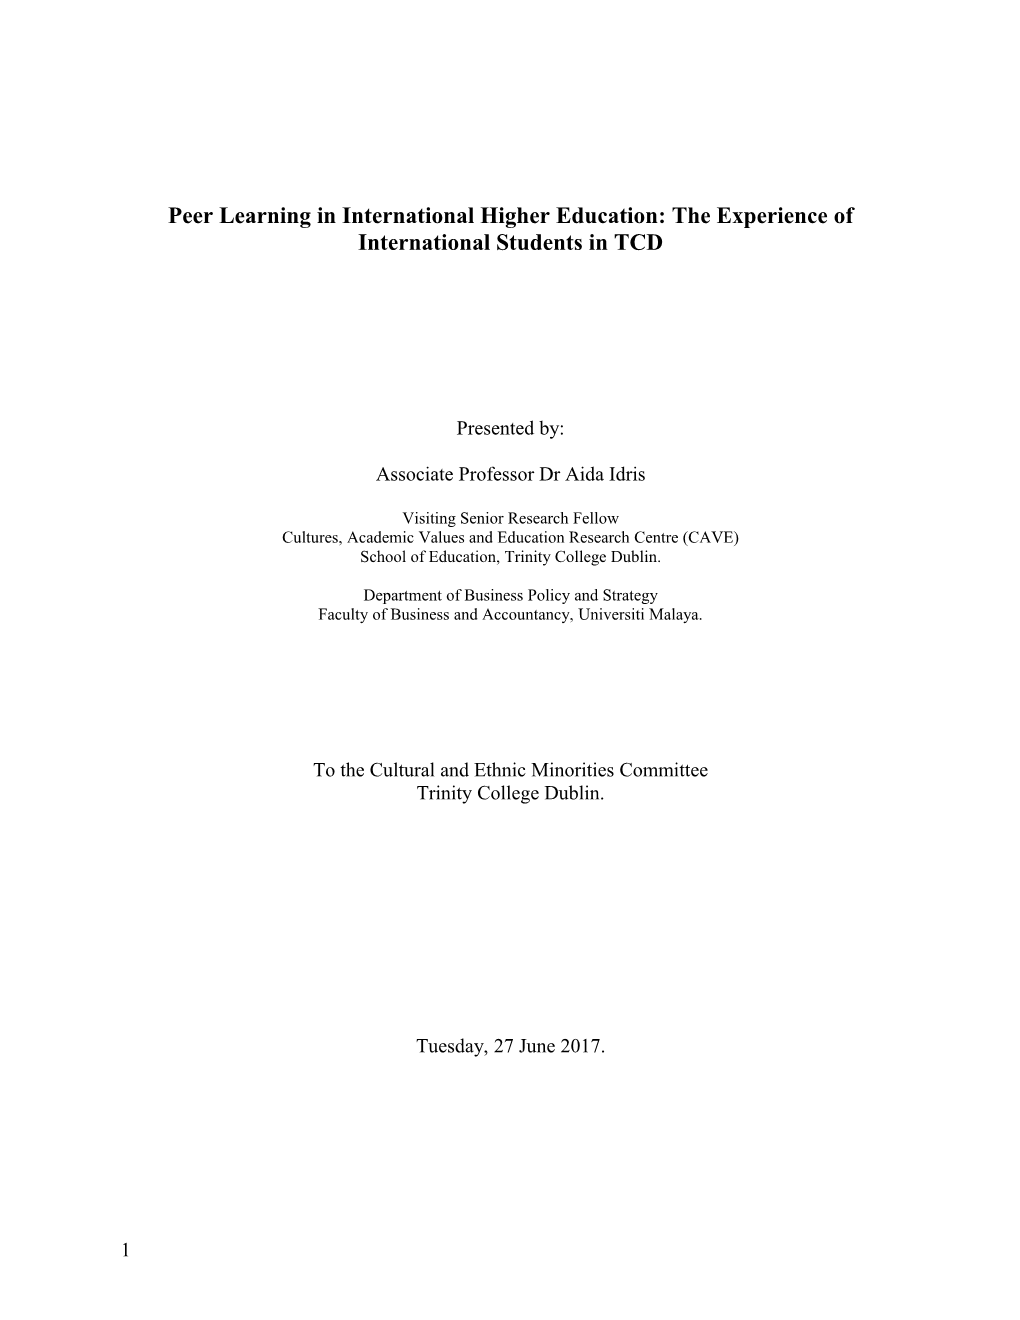 Peer Learning in International Higher Education: the Experience of International Students